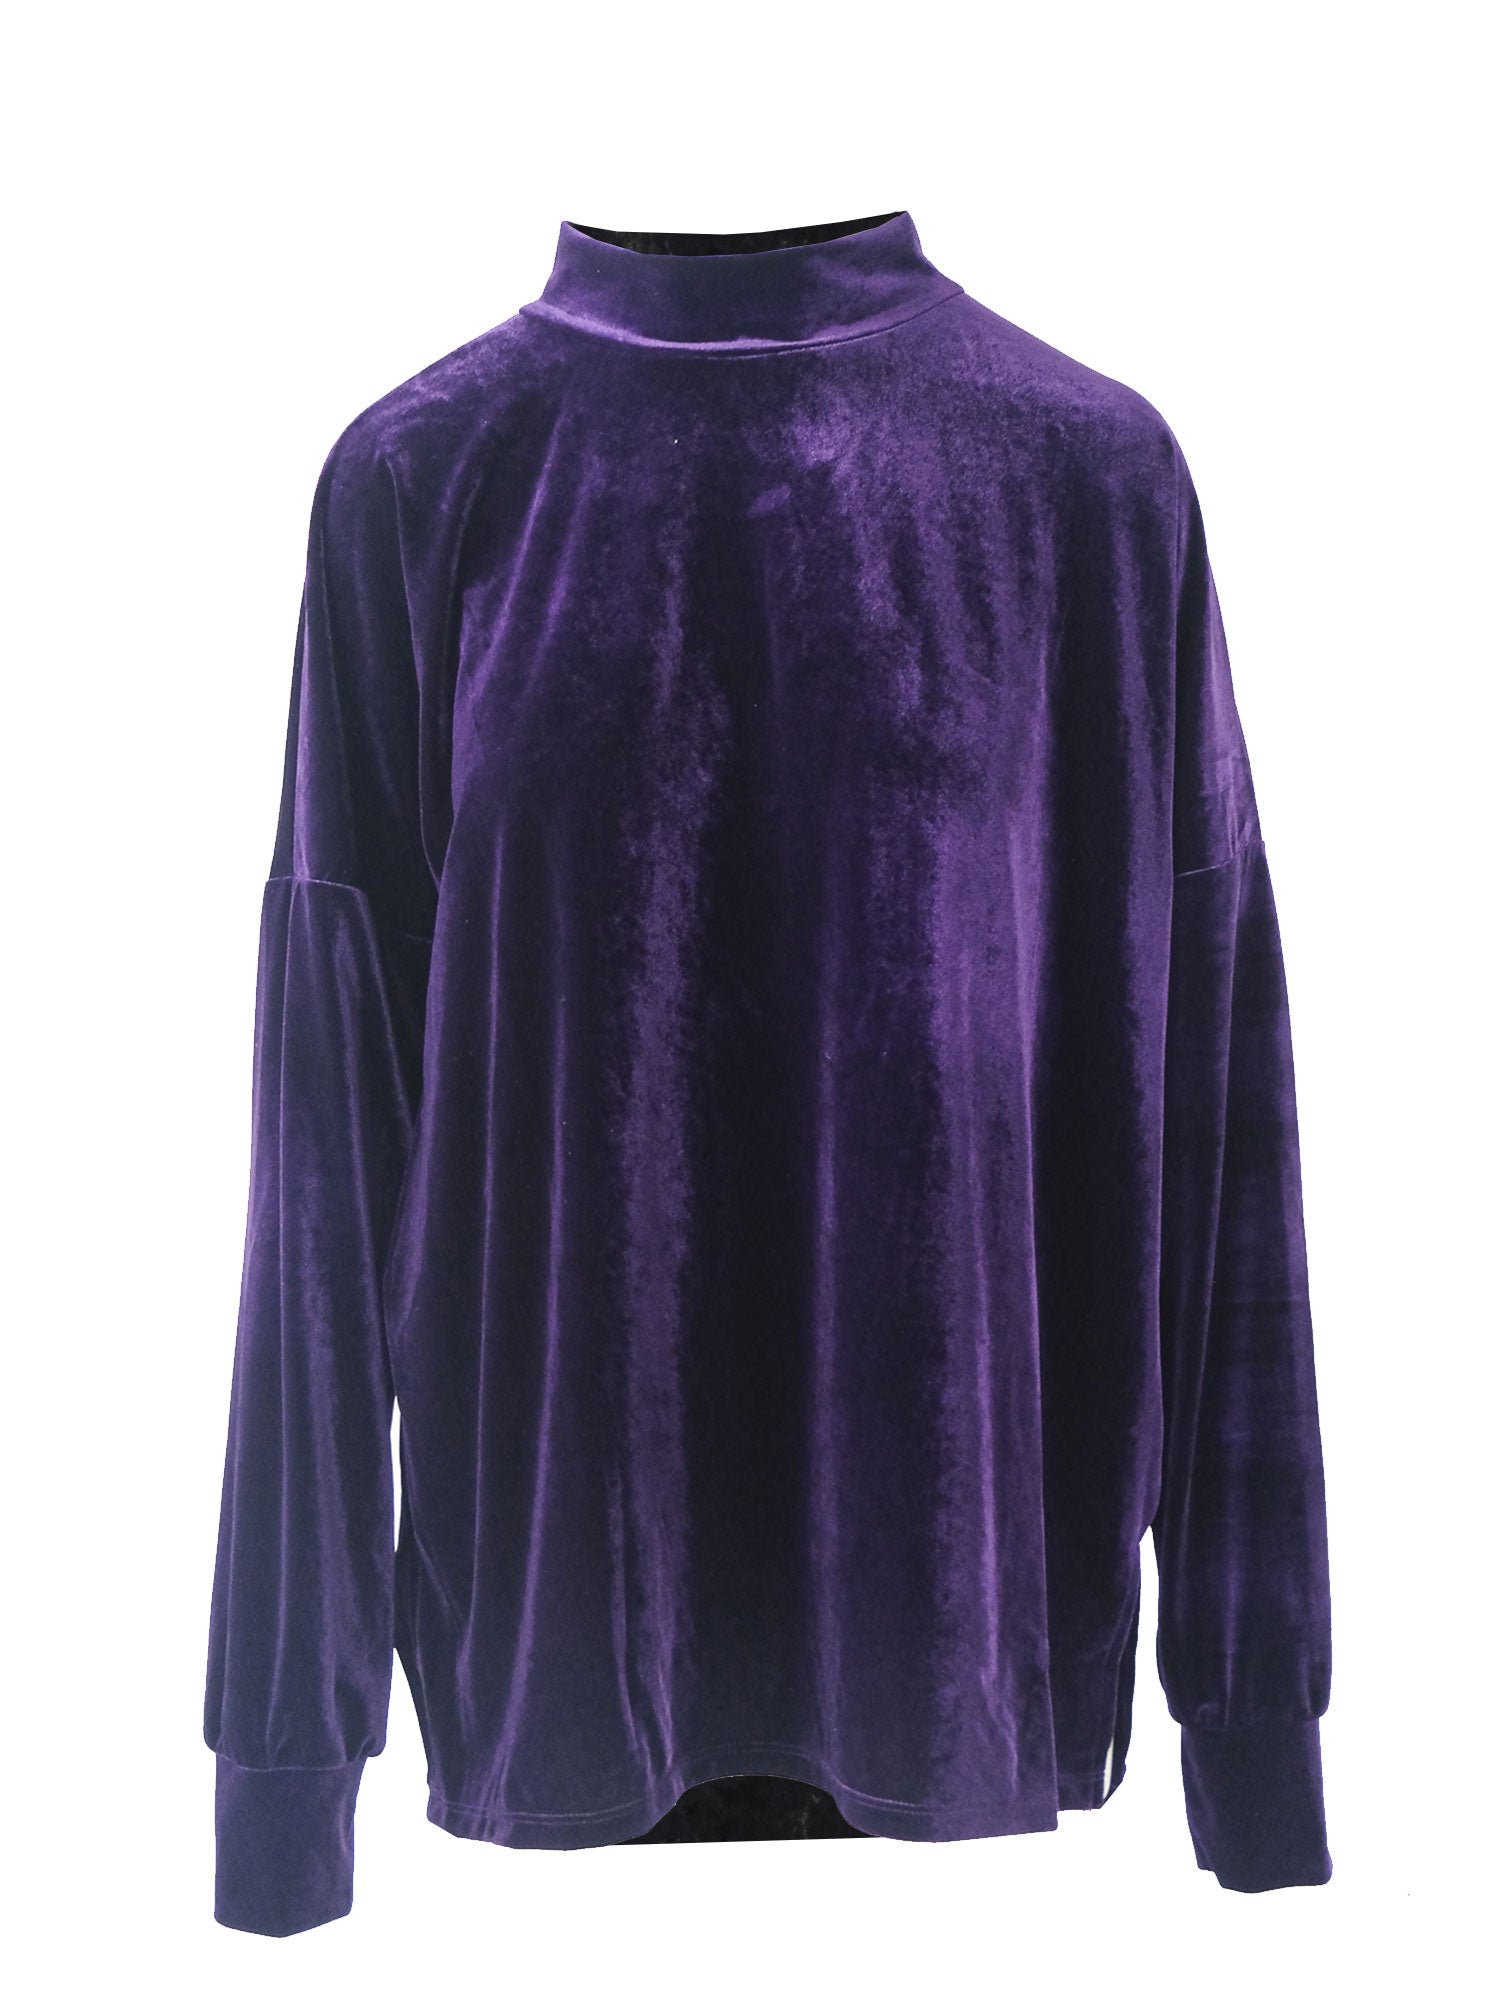 FLORENCE - sweatshirt over with turtleneck in purple chenille